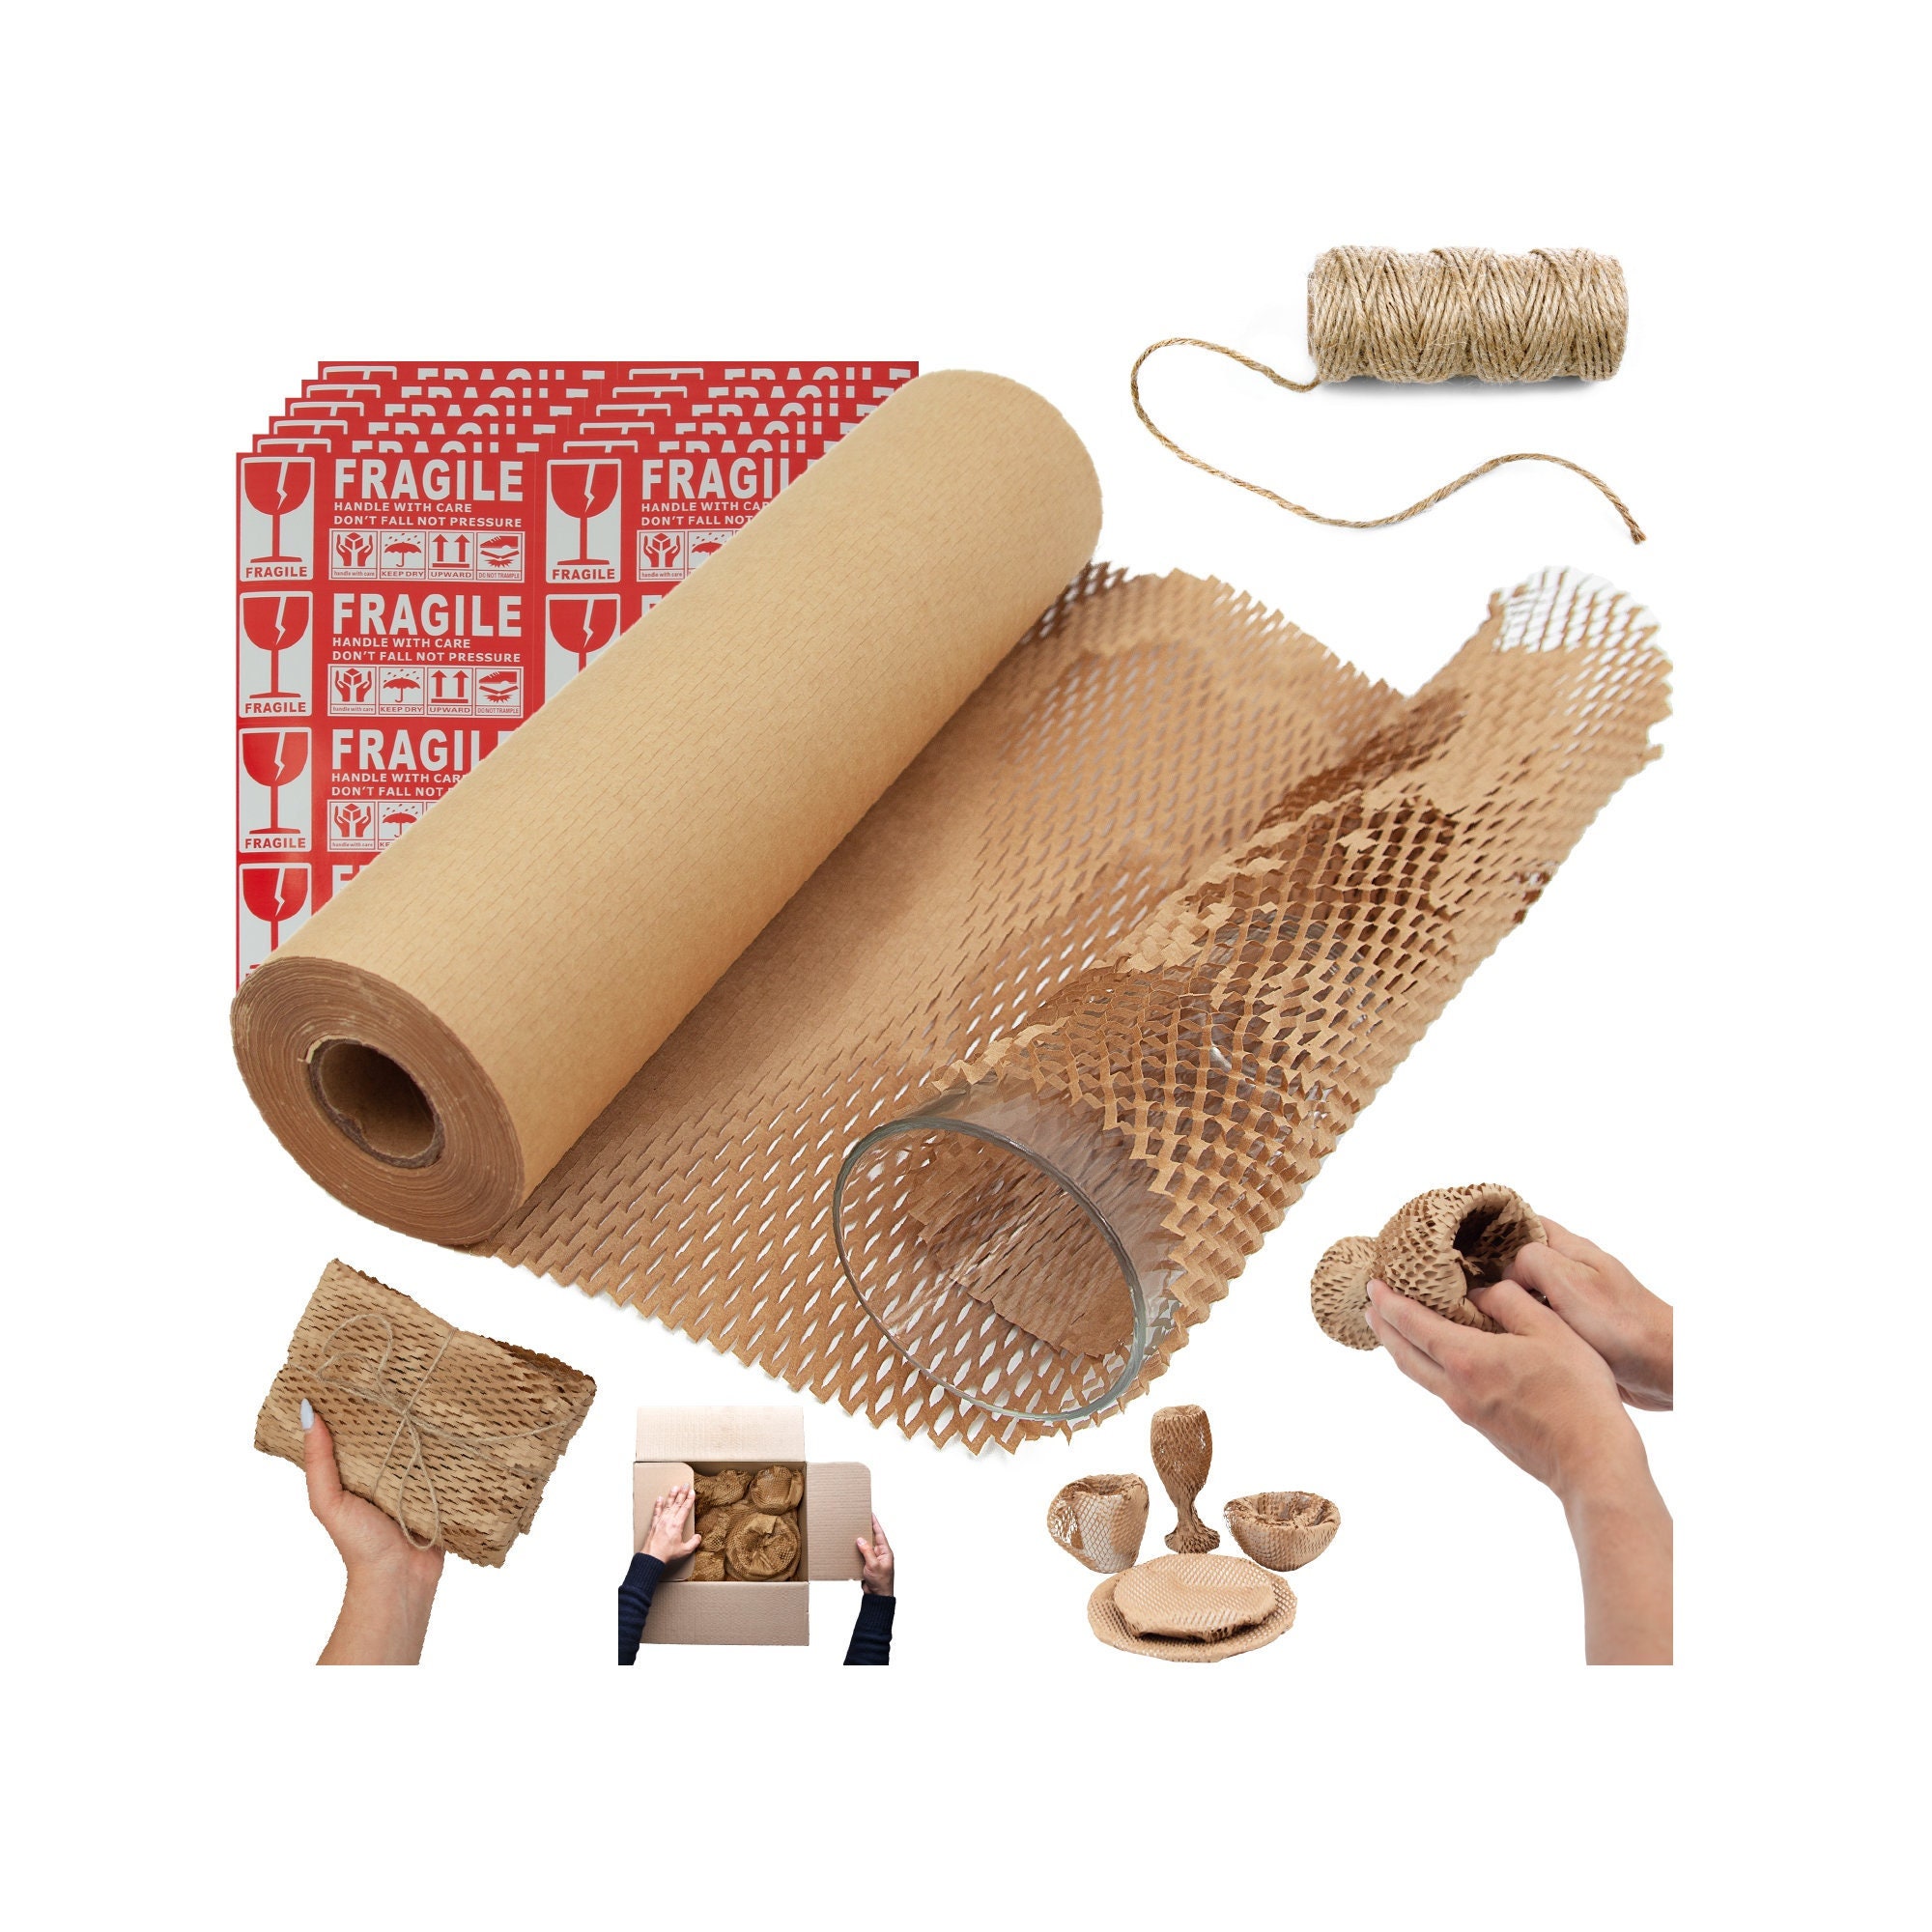 Kraft Paper Roll 12 x 1200(100 ft)Large Brown Paper Roll - Ideal for Gift  Wrapping, Crafts, Postal